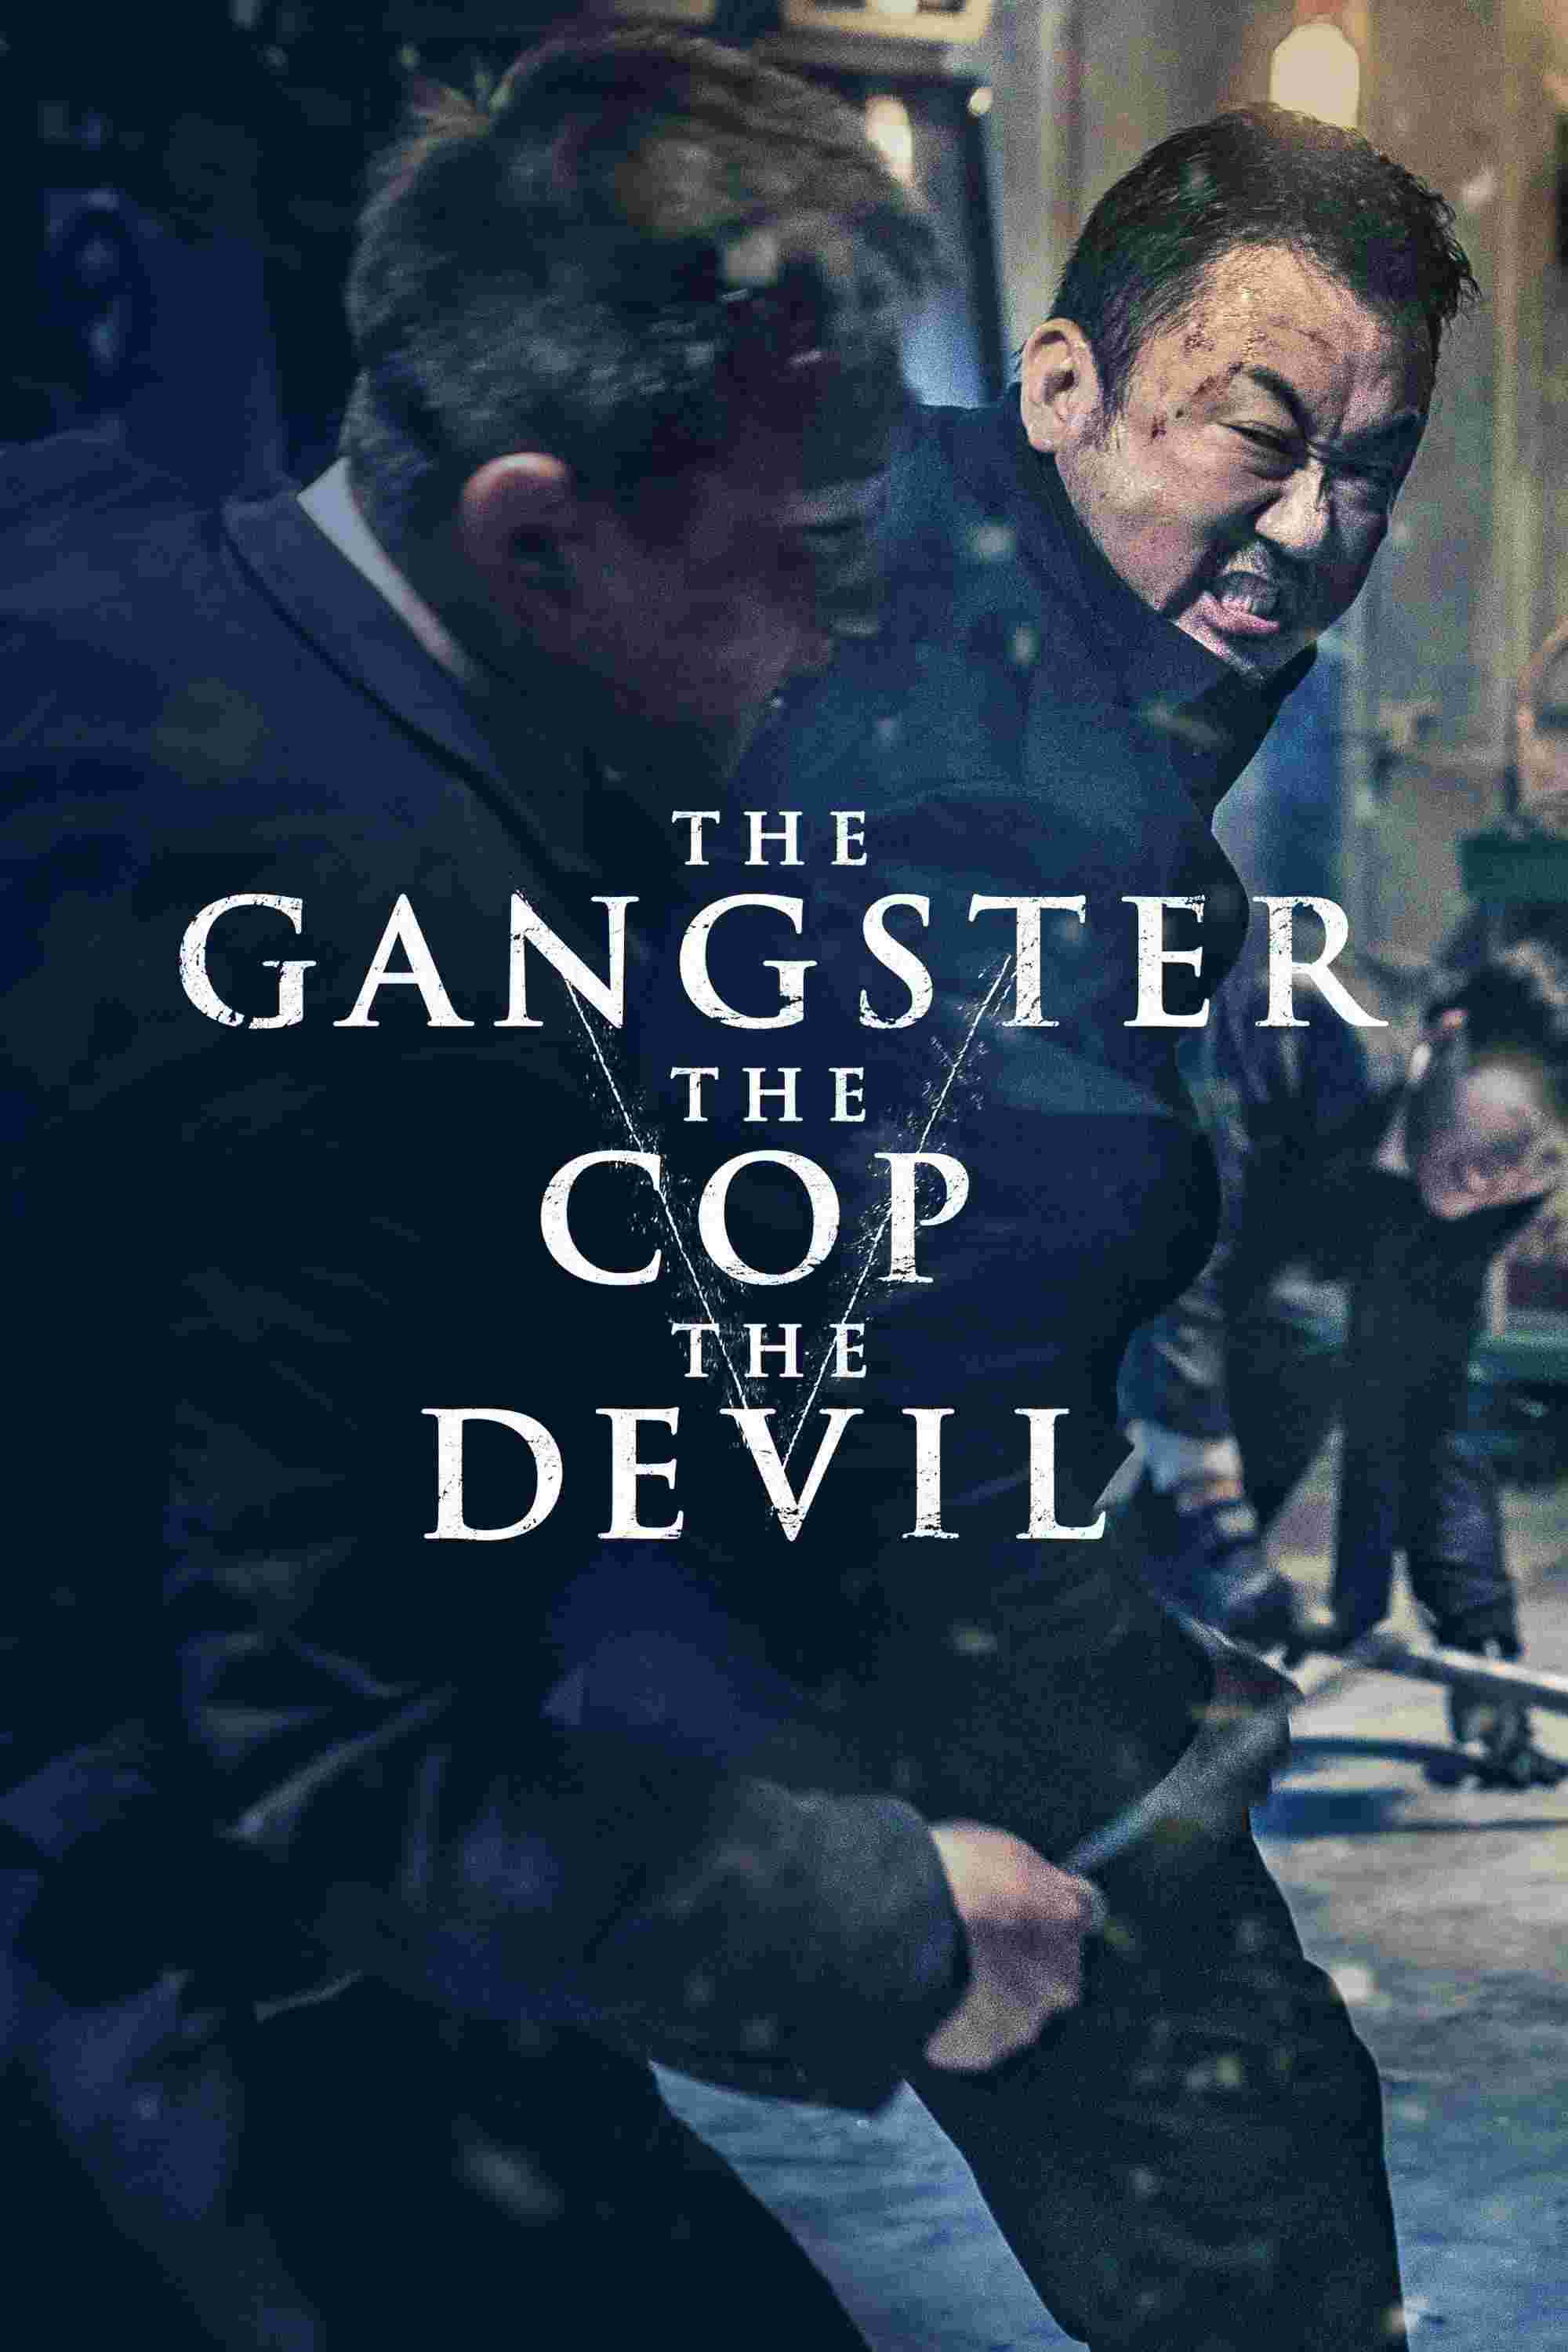 The Gangster, the Cop, the Devil (2019) Ma Dong-seok